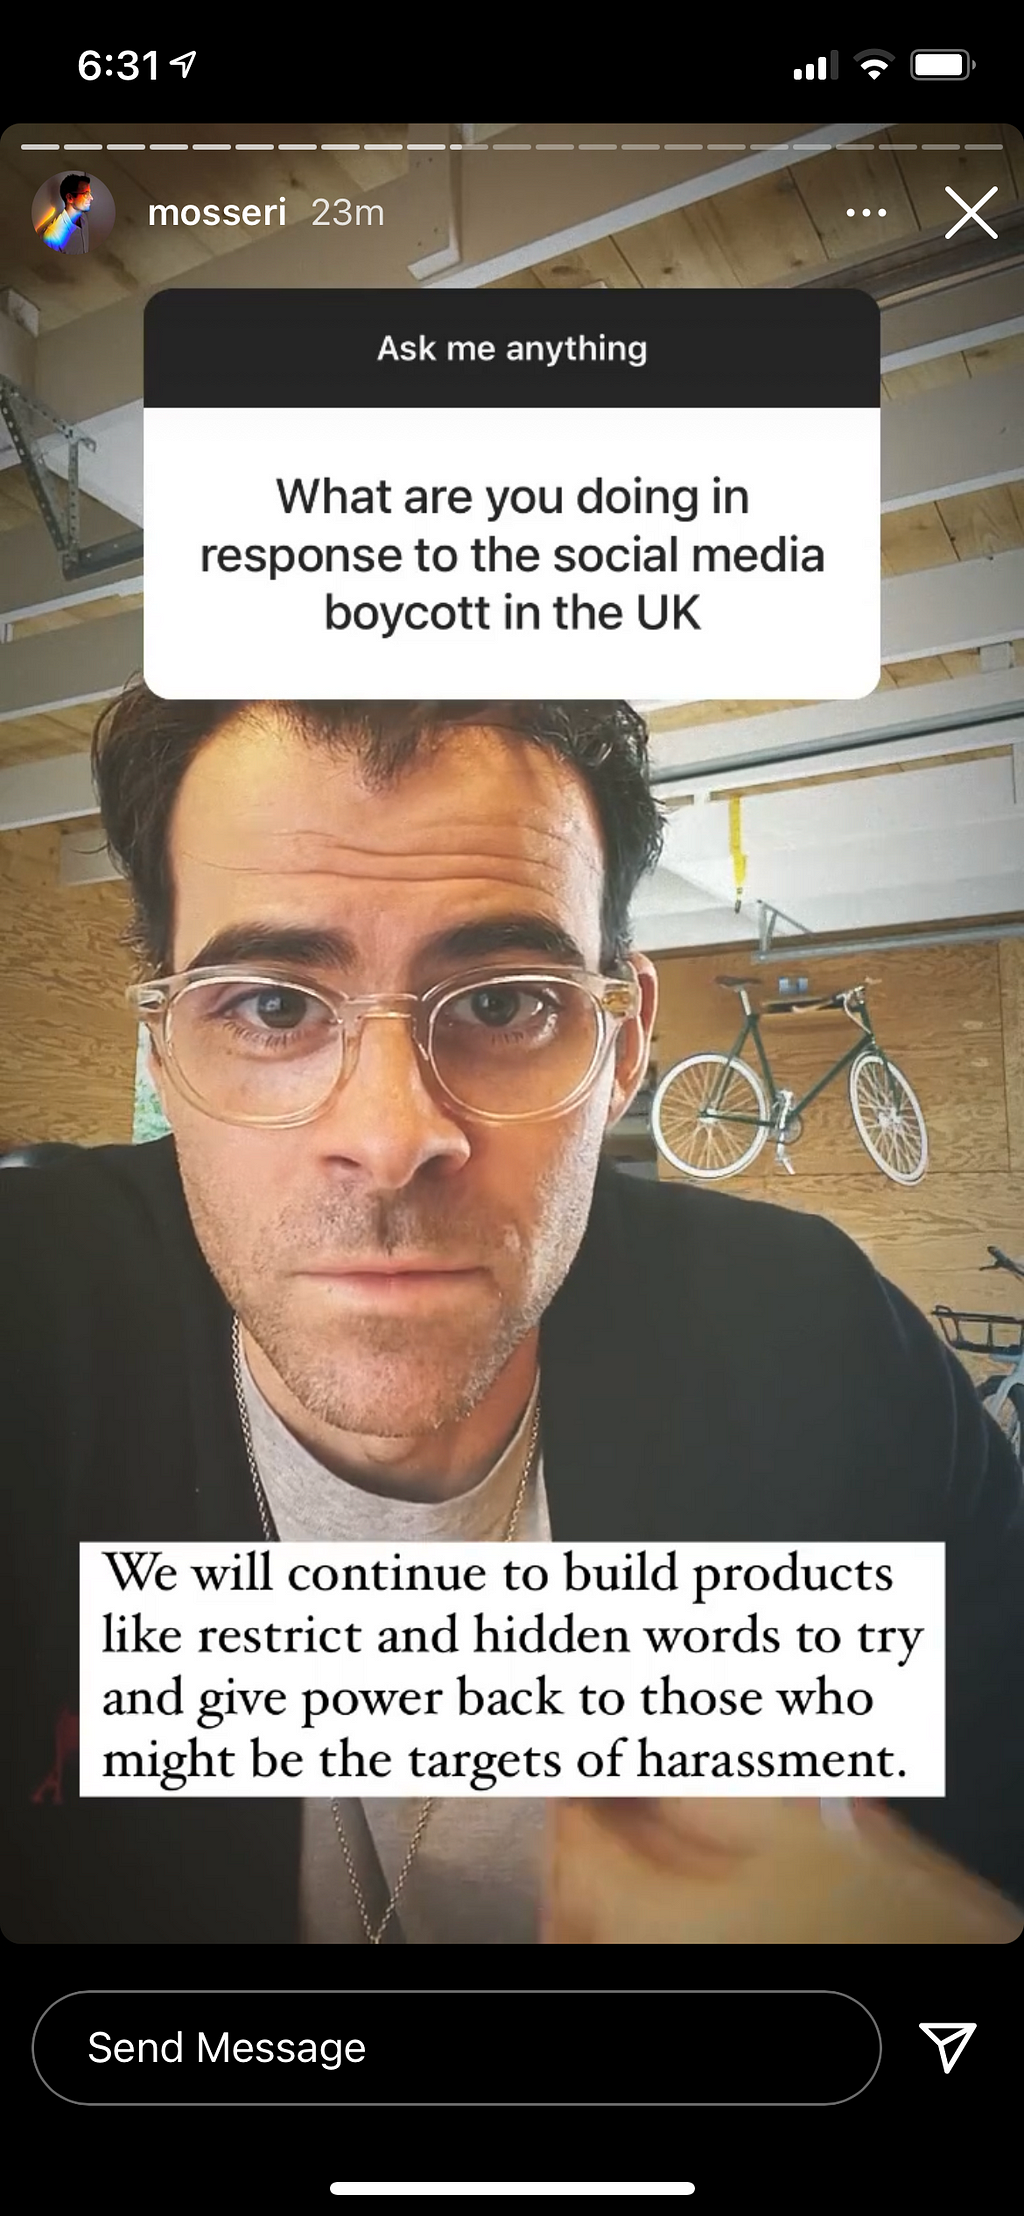 Adam Mosseri answering the question ‘what are you doing in response to the social media boycott in the UK.’ Answer: We will continue to build products like restrict and hidden words to try and give power back to those who might be the targets of harassment.